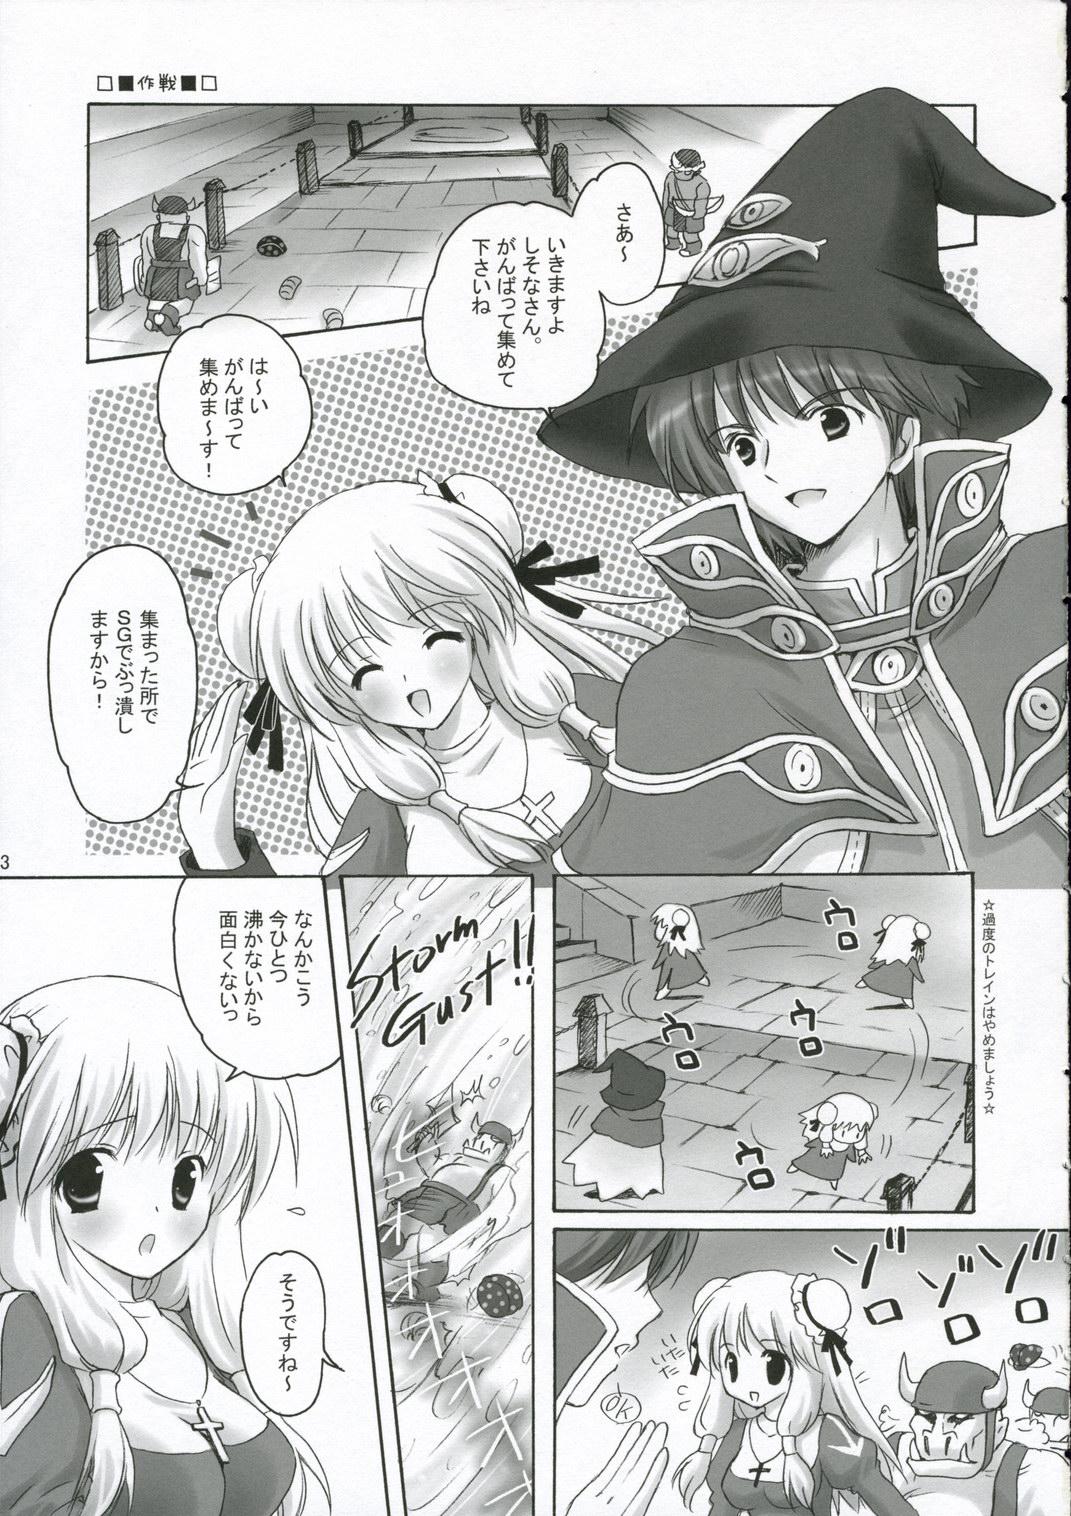 For PUCHI and PUCHI - Ragnarok online Ride - Page 2